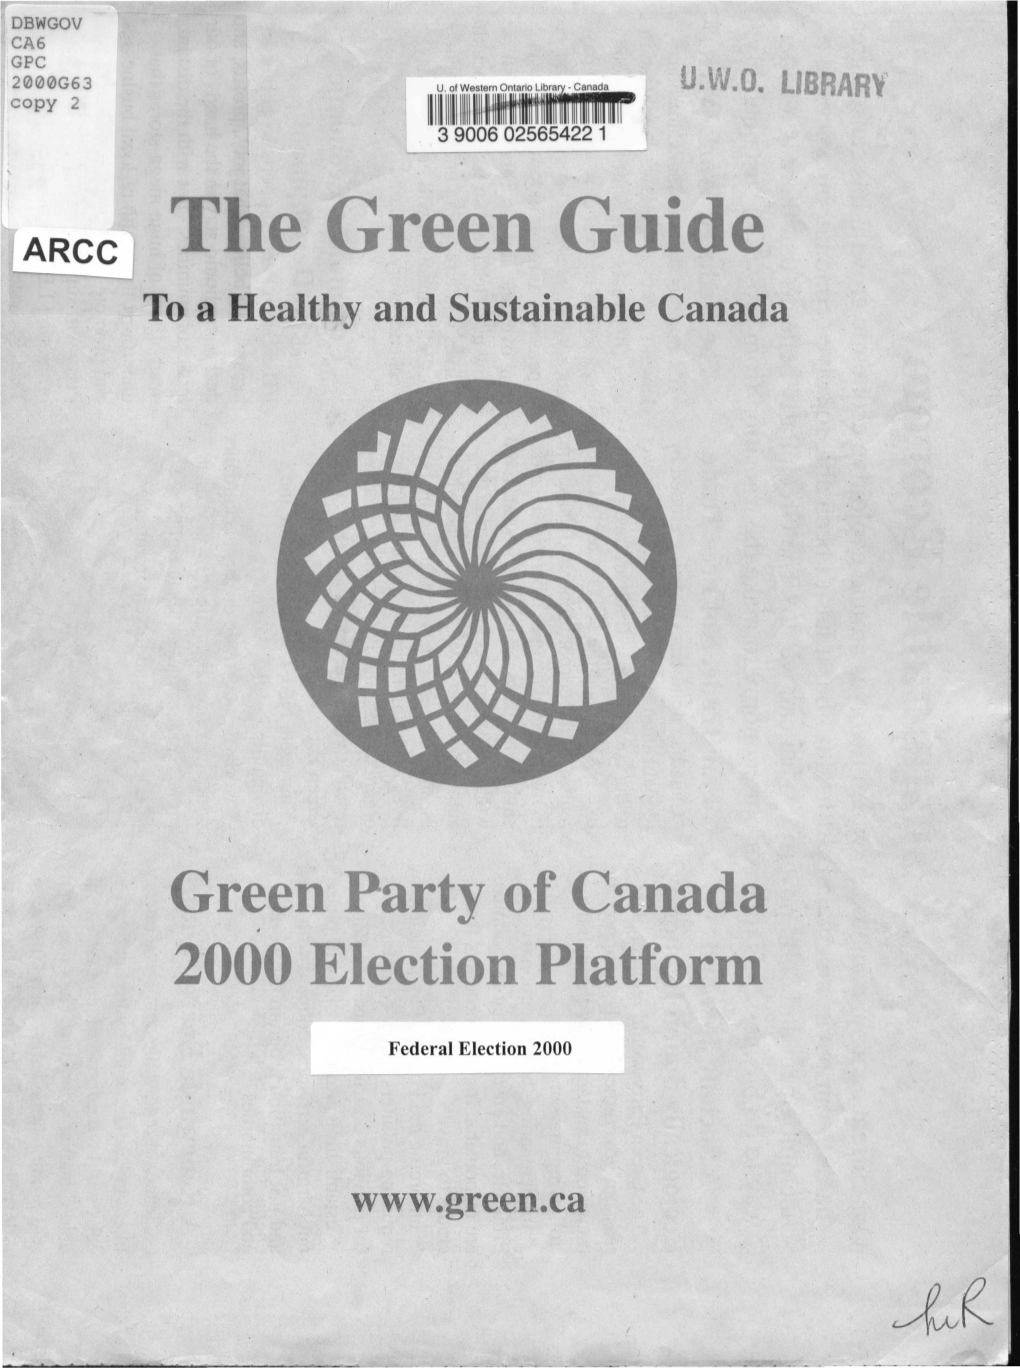 T E Green Guide to a Healthy and Sustainable Canada